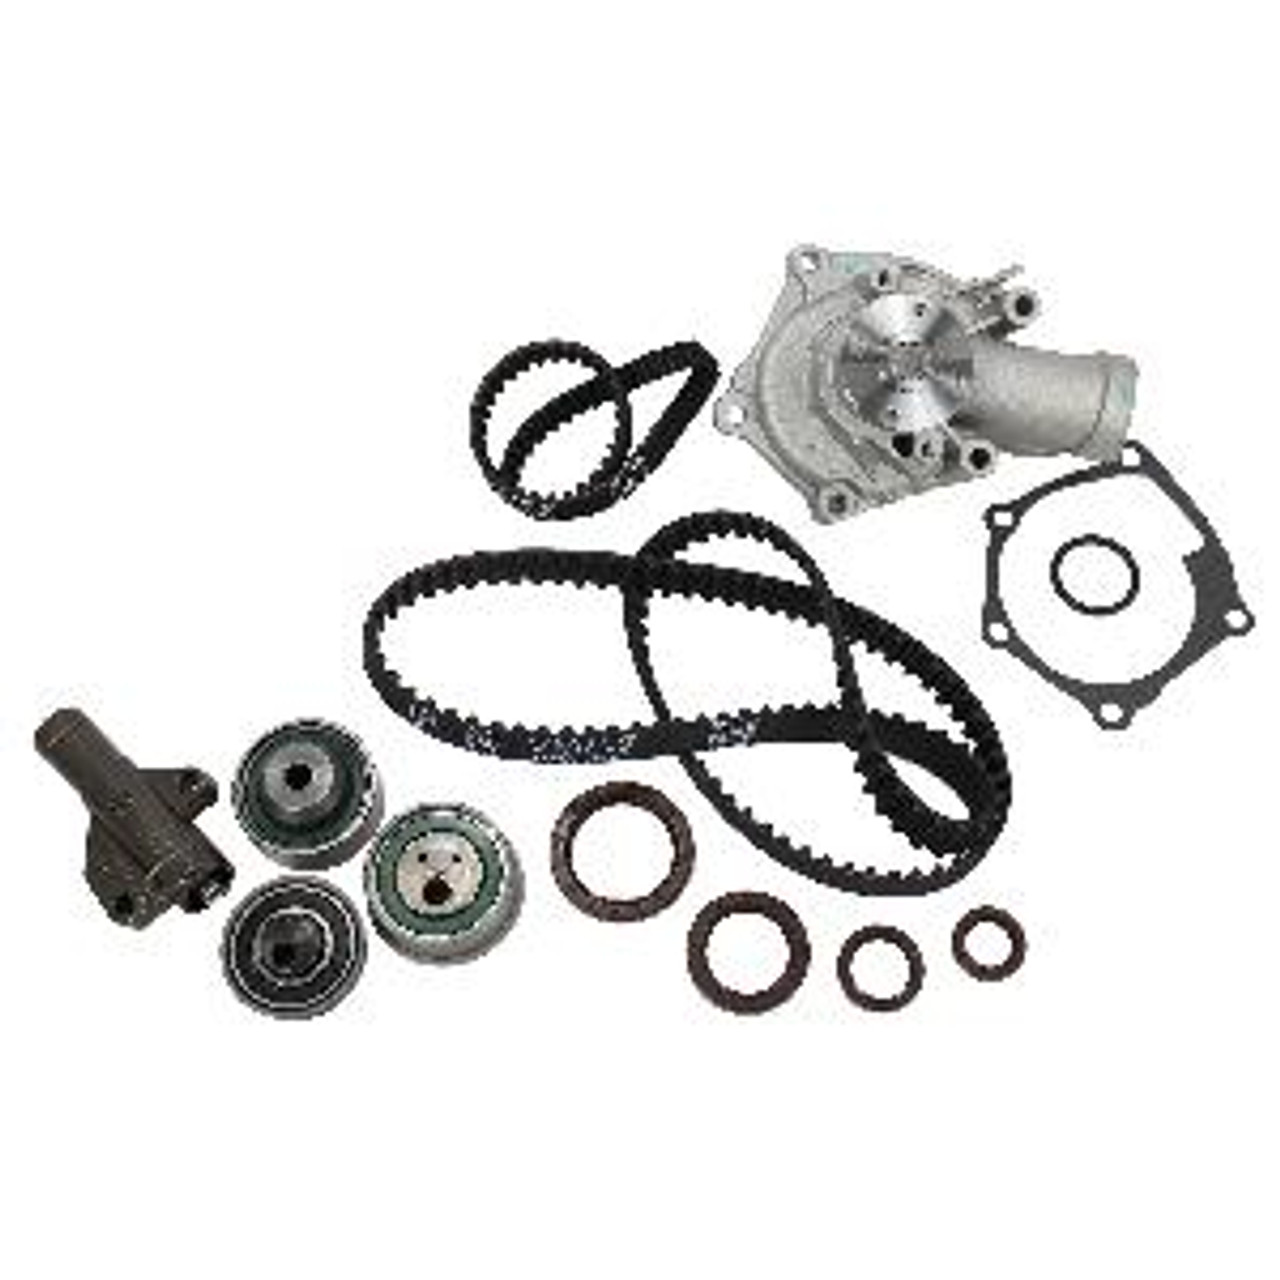 2007 Mitsubishi Eclipse 2.4L Engine Timing Belt Kit with Water Pump TBK162WP -11